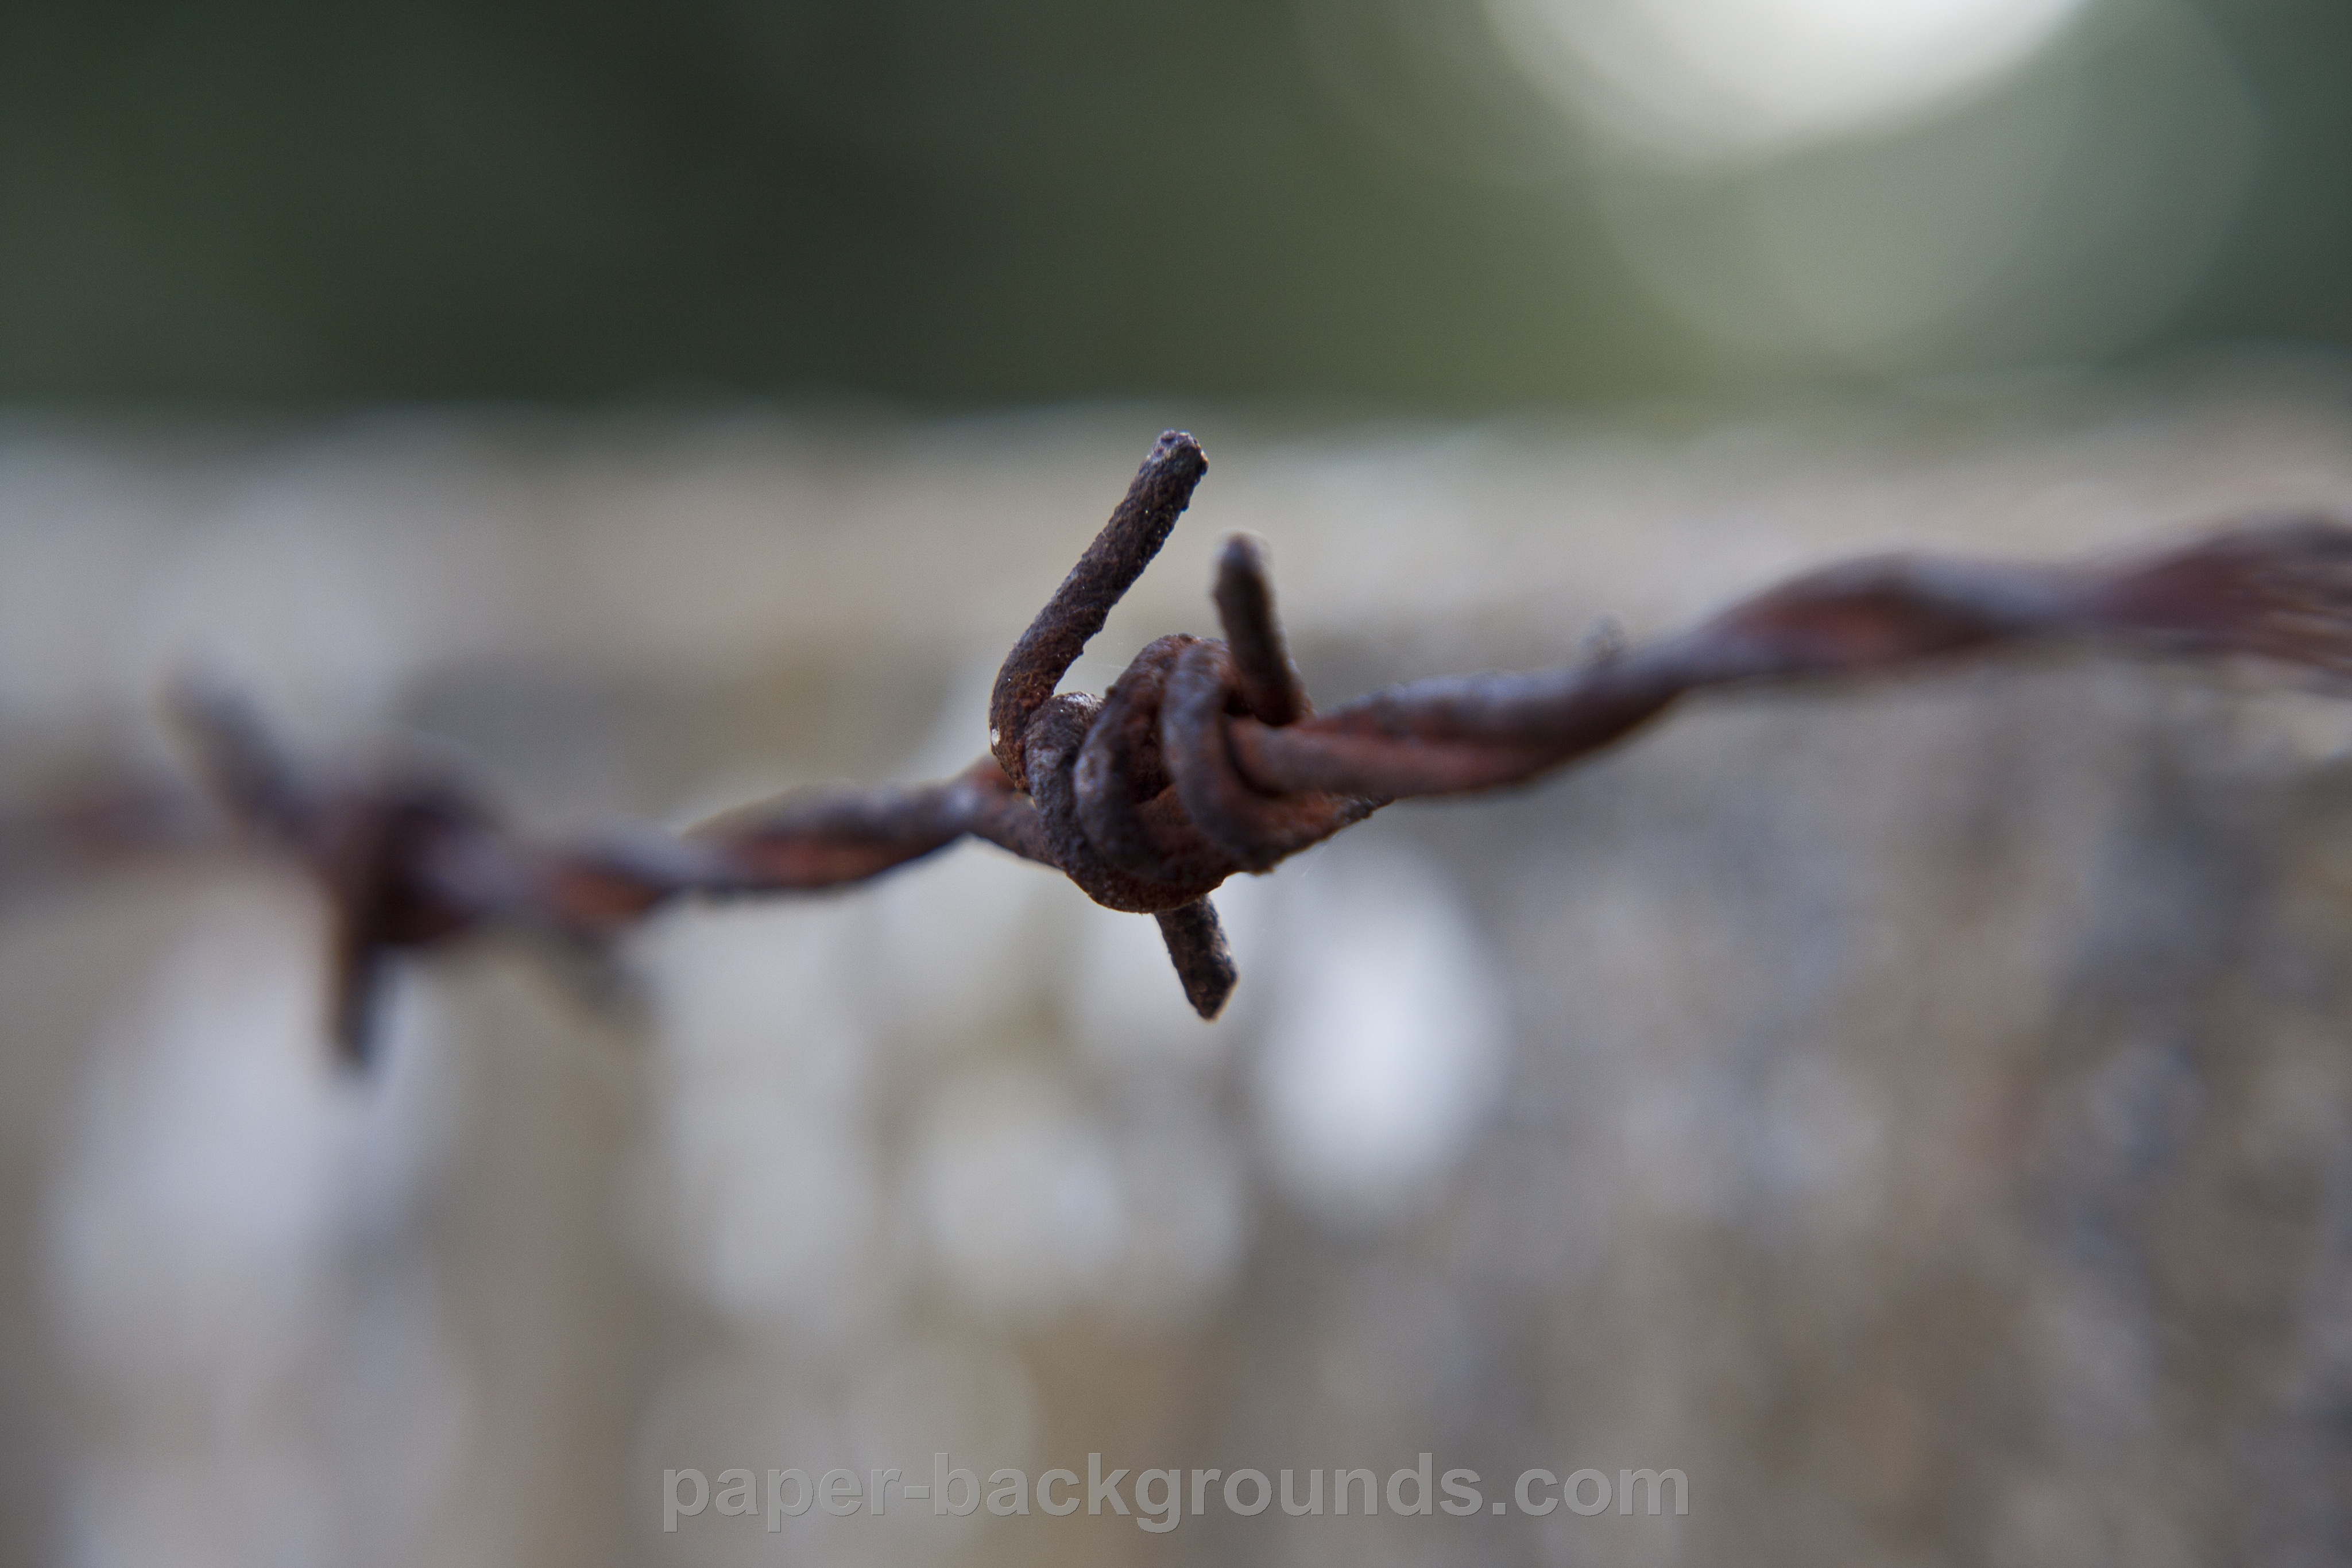 Paper Backgrounds | rusty-barbed-wire-close-up-macro